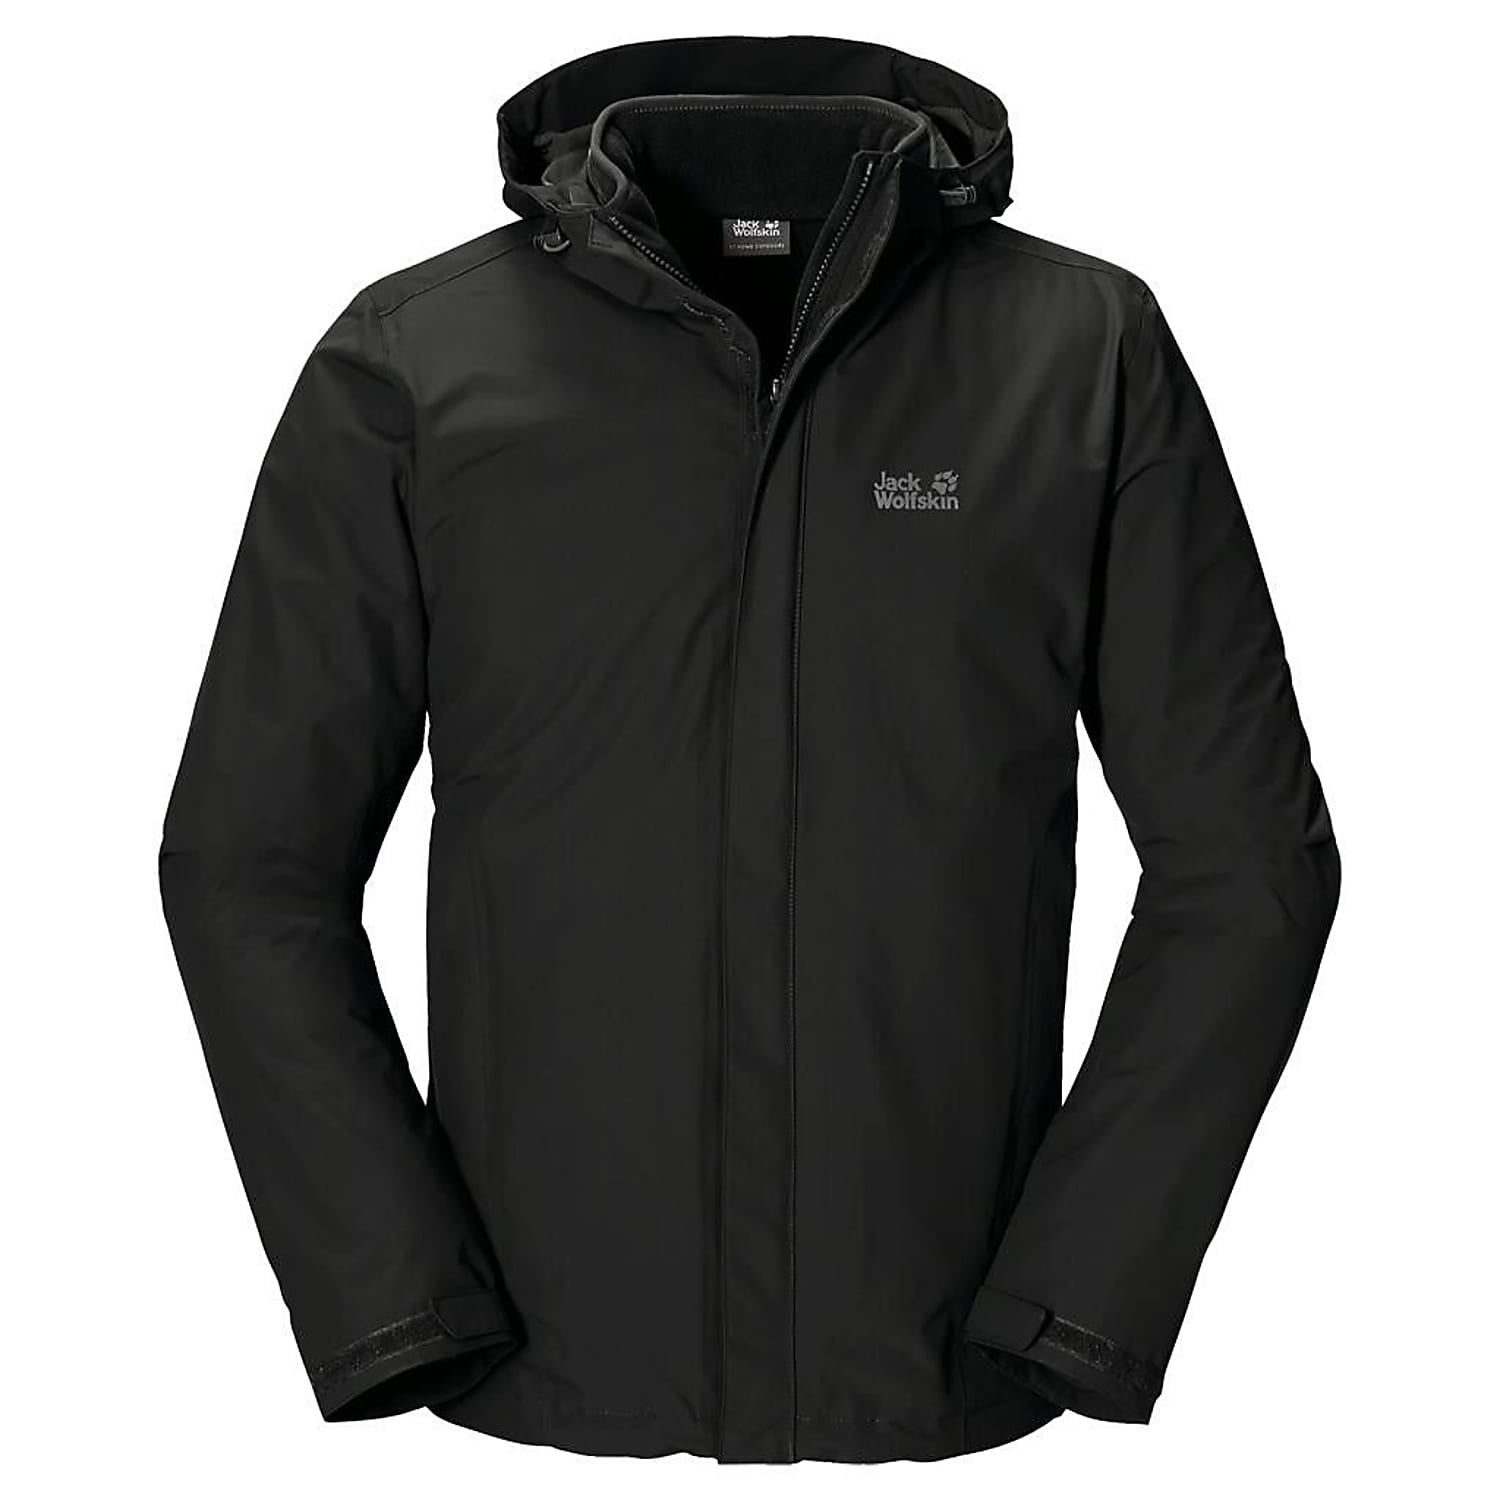 Jack Wolfskin CRUSH'N ICE, Black - Fast and cheap shipping - www.exxpozed.com